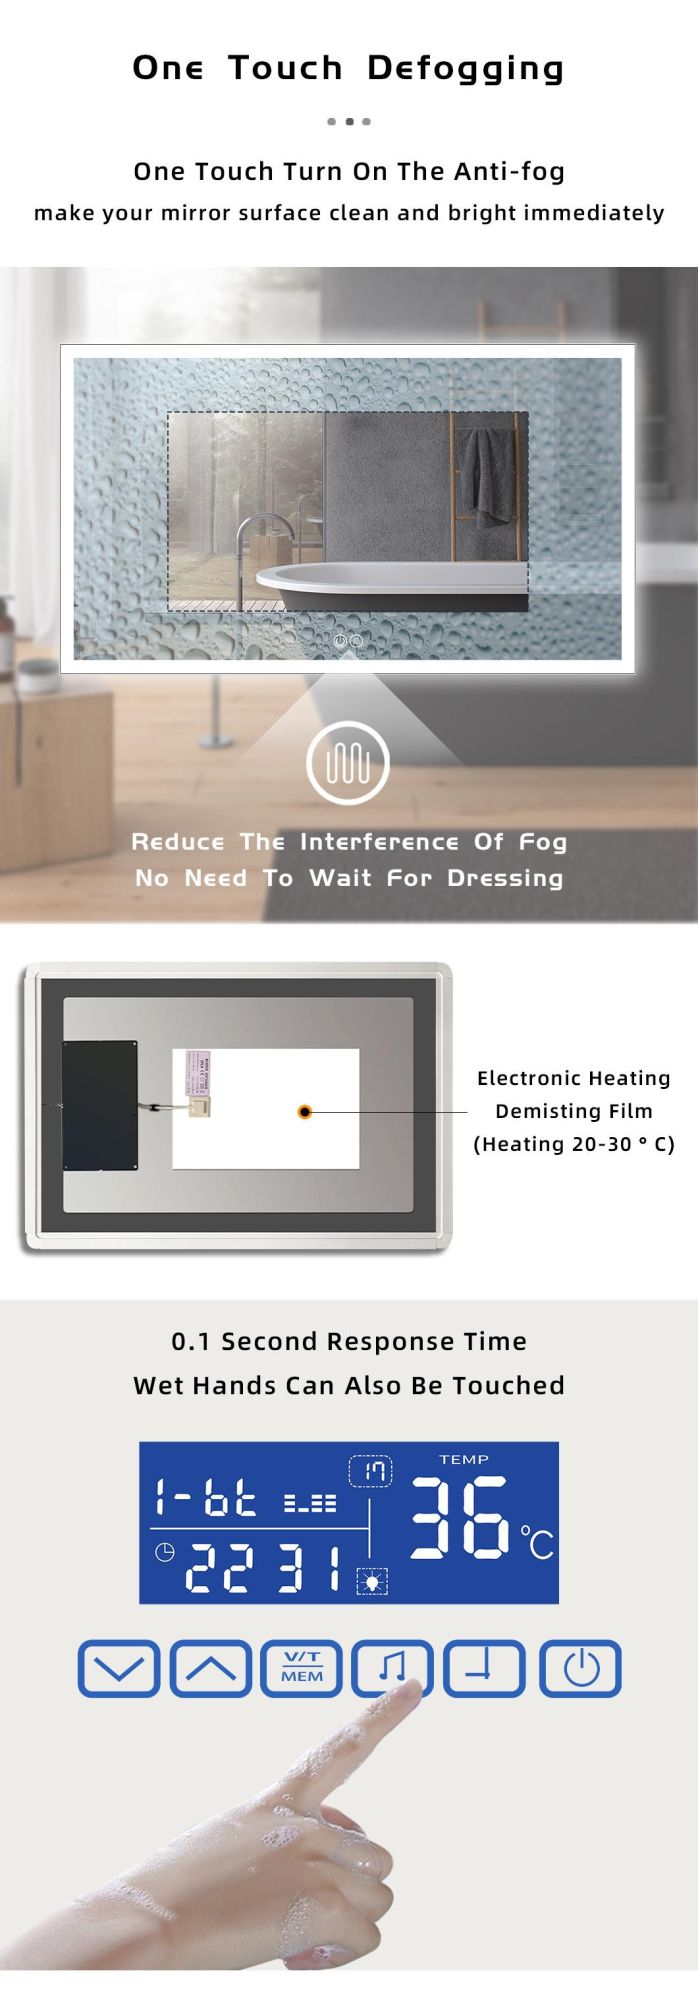 Hotel LED Wall Mirrors Frameless Bath Mirrors Bathroom Lighted Glass Mirror with Waterproof IP44 Rating